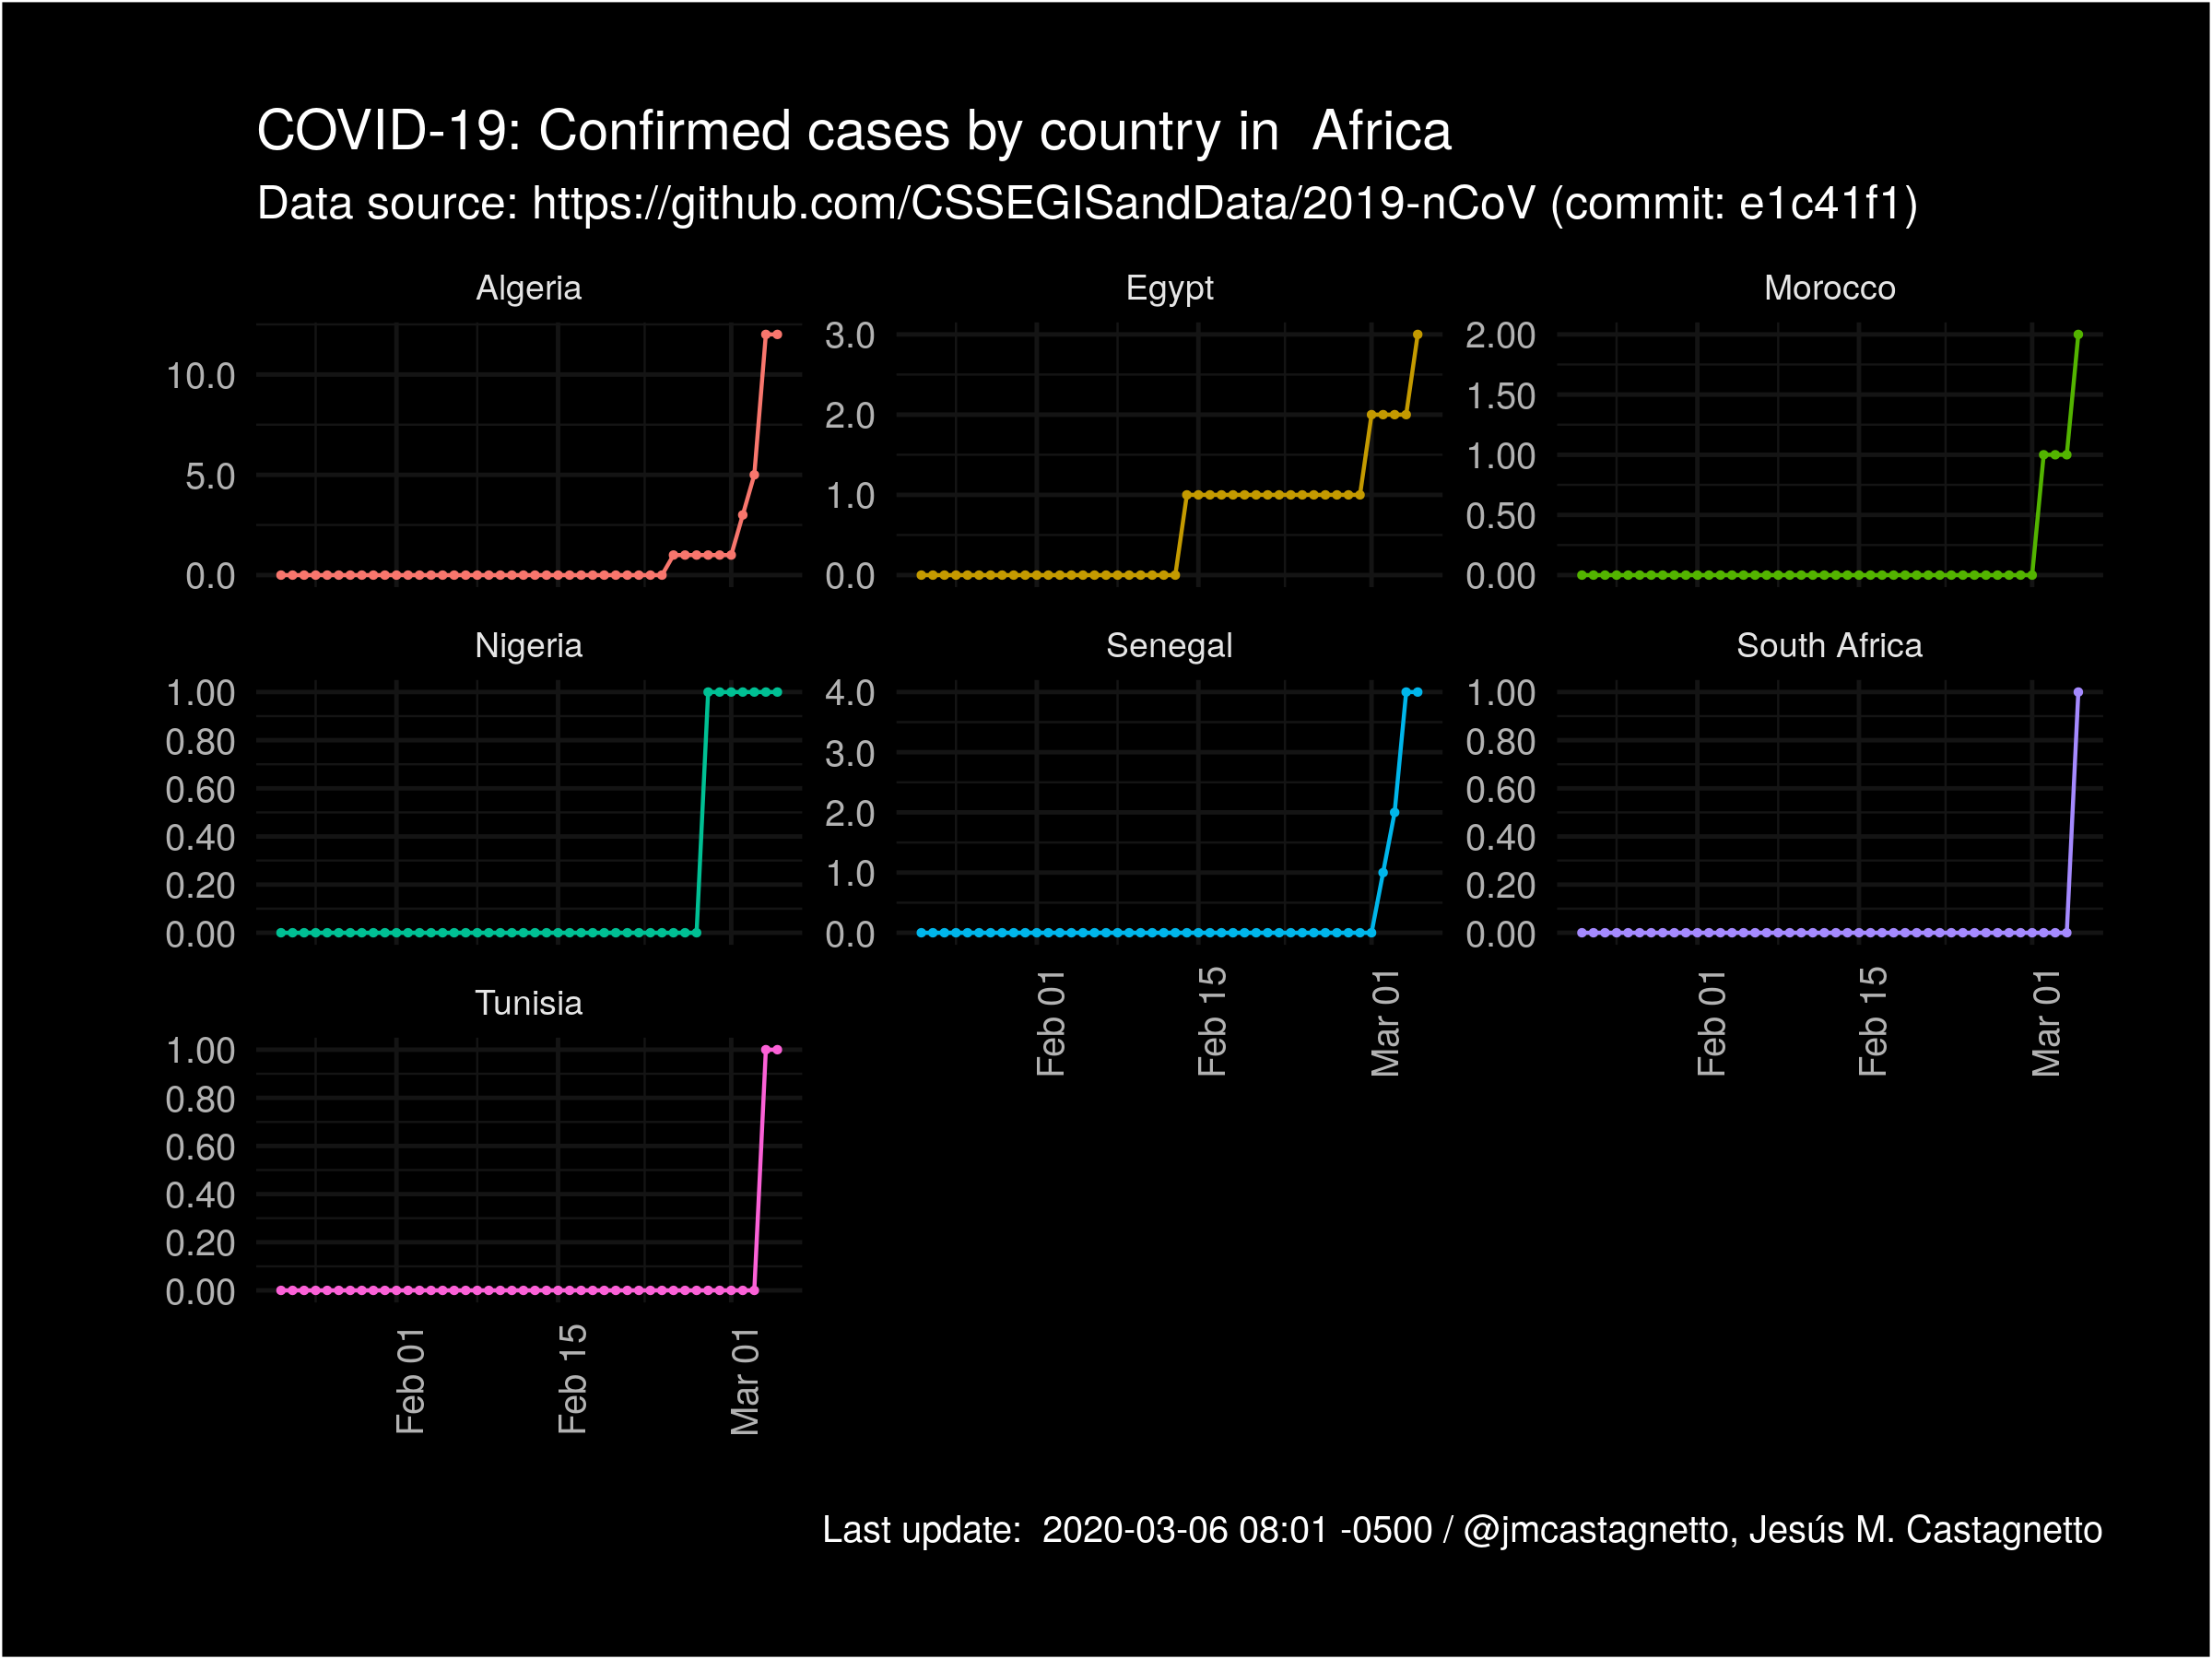 COVID-19 Confirmed cases by country (Africa)